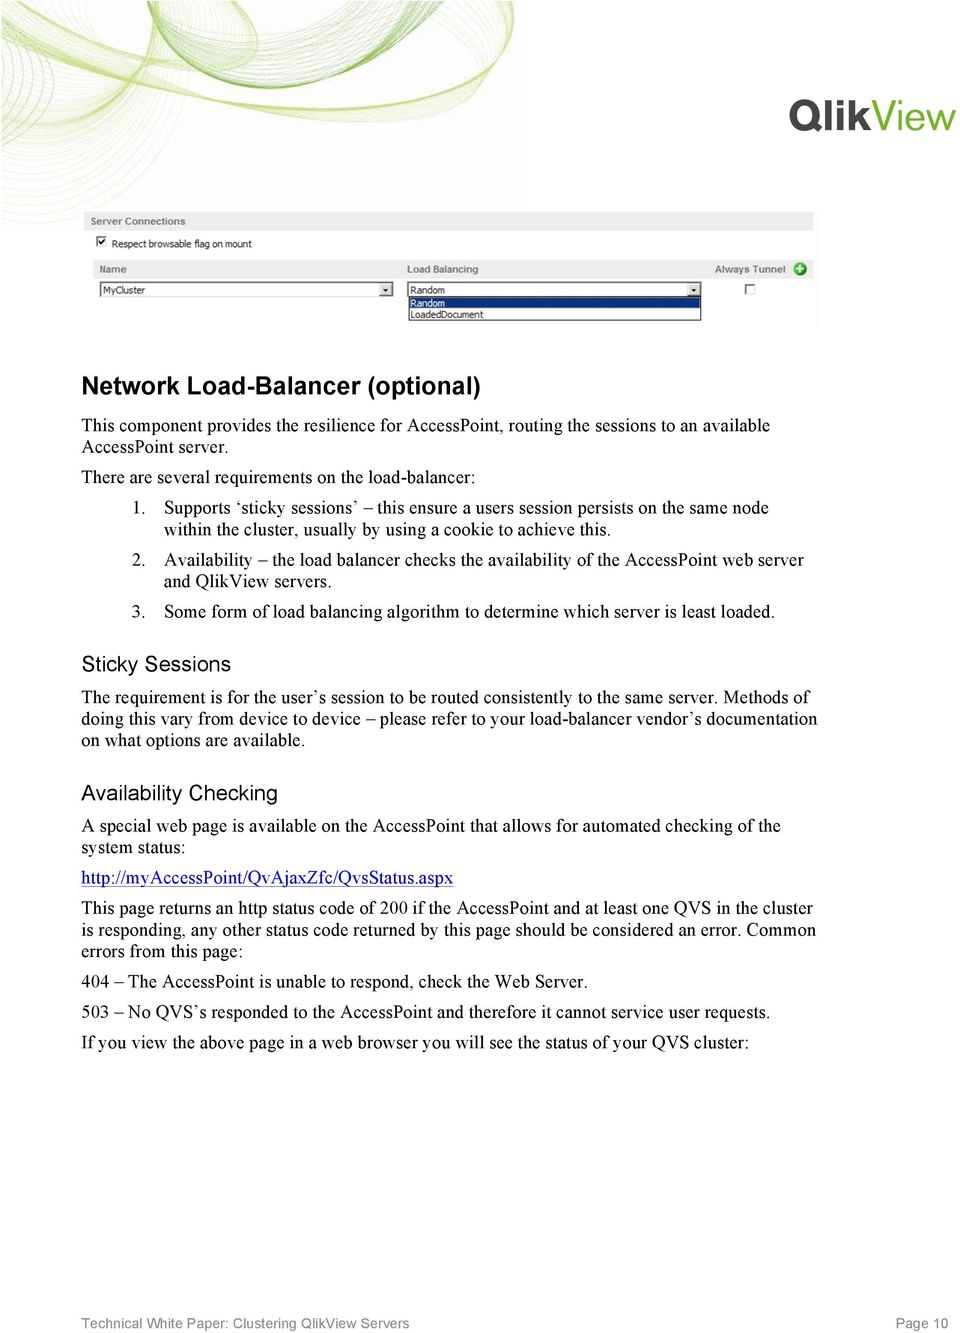 Availability the load balancer checks the availability of the AccessPoint web server and QlikView servers. 3. Some form of load balancing algorithm to determine which server is least loaded.